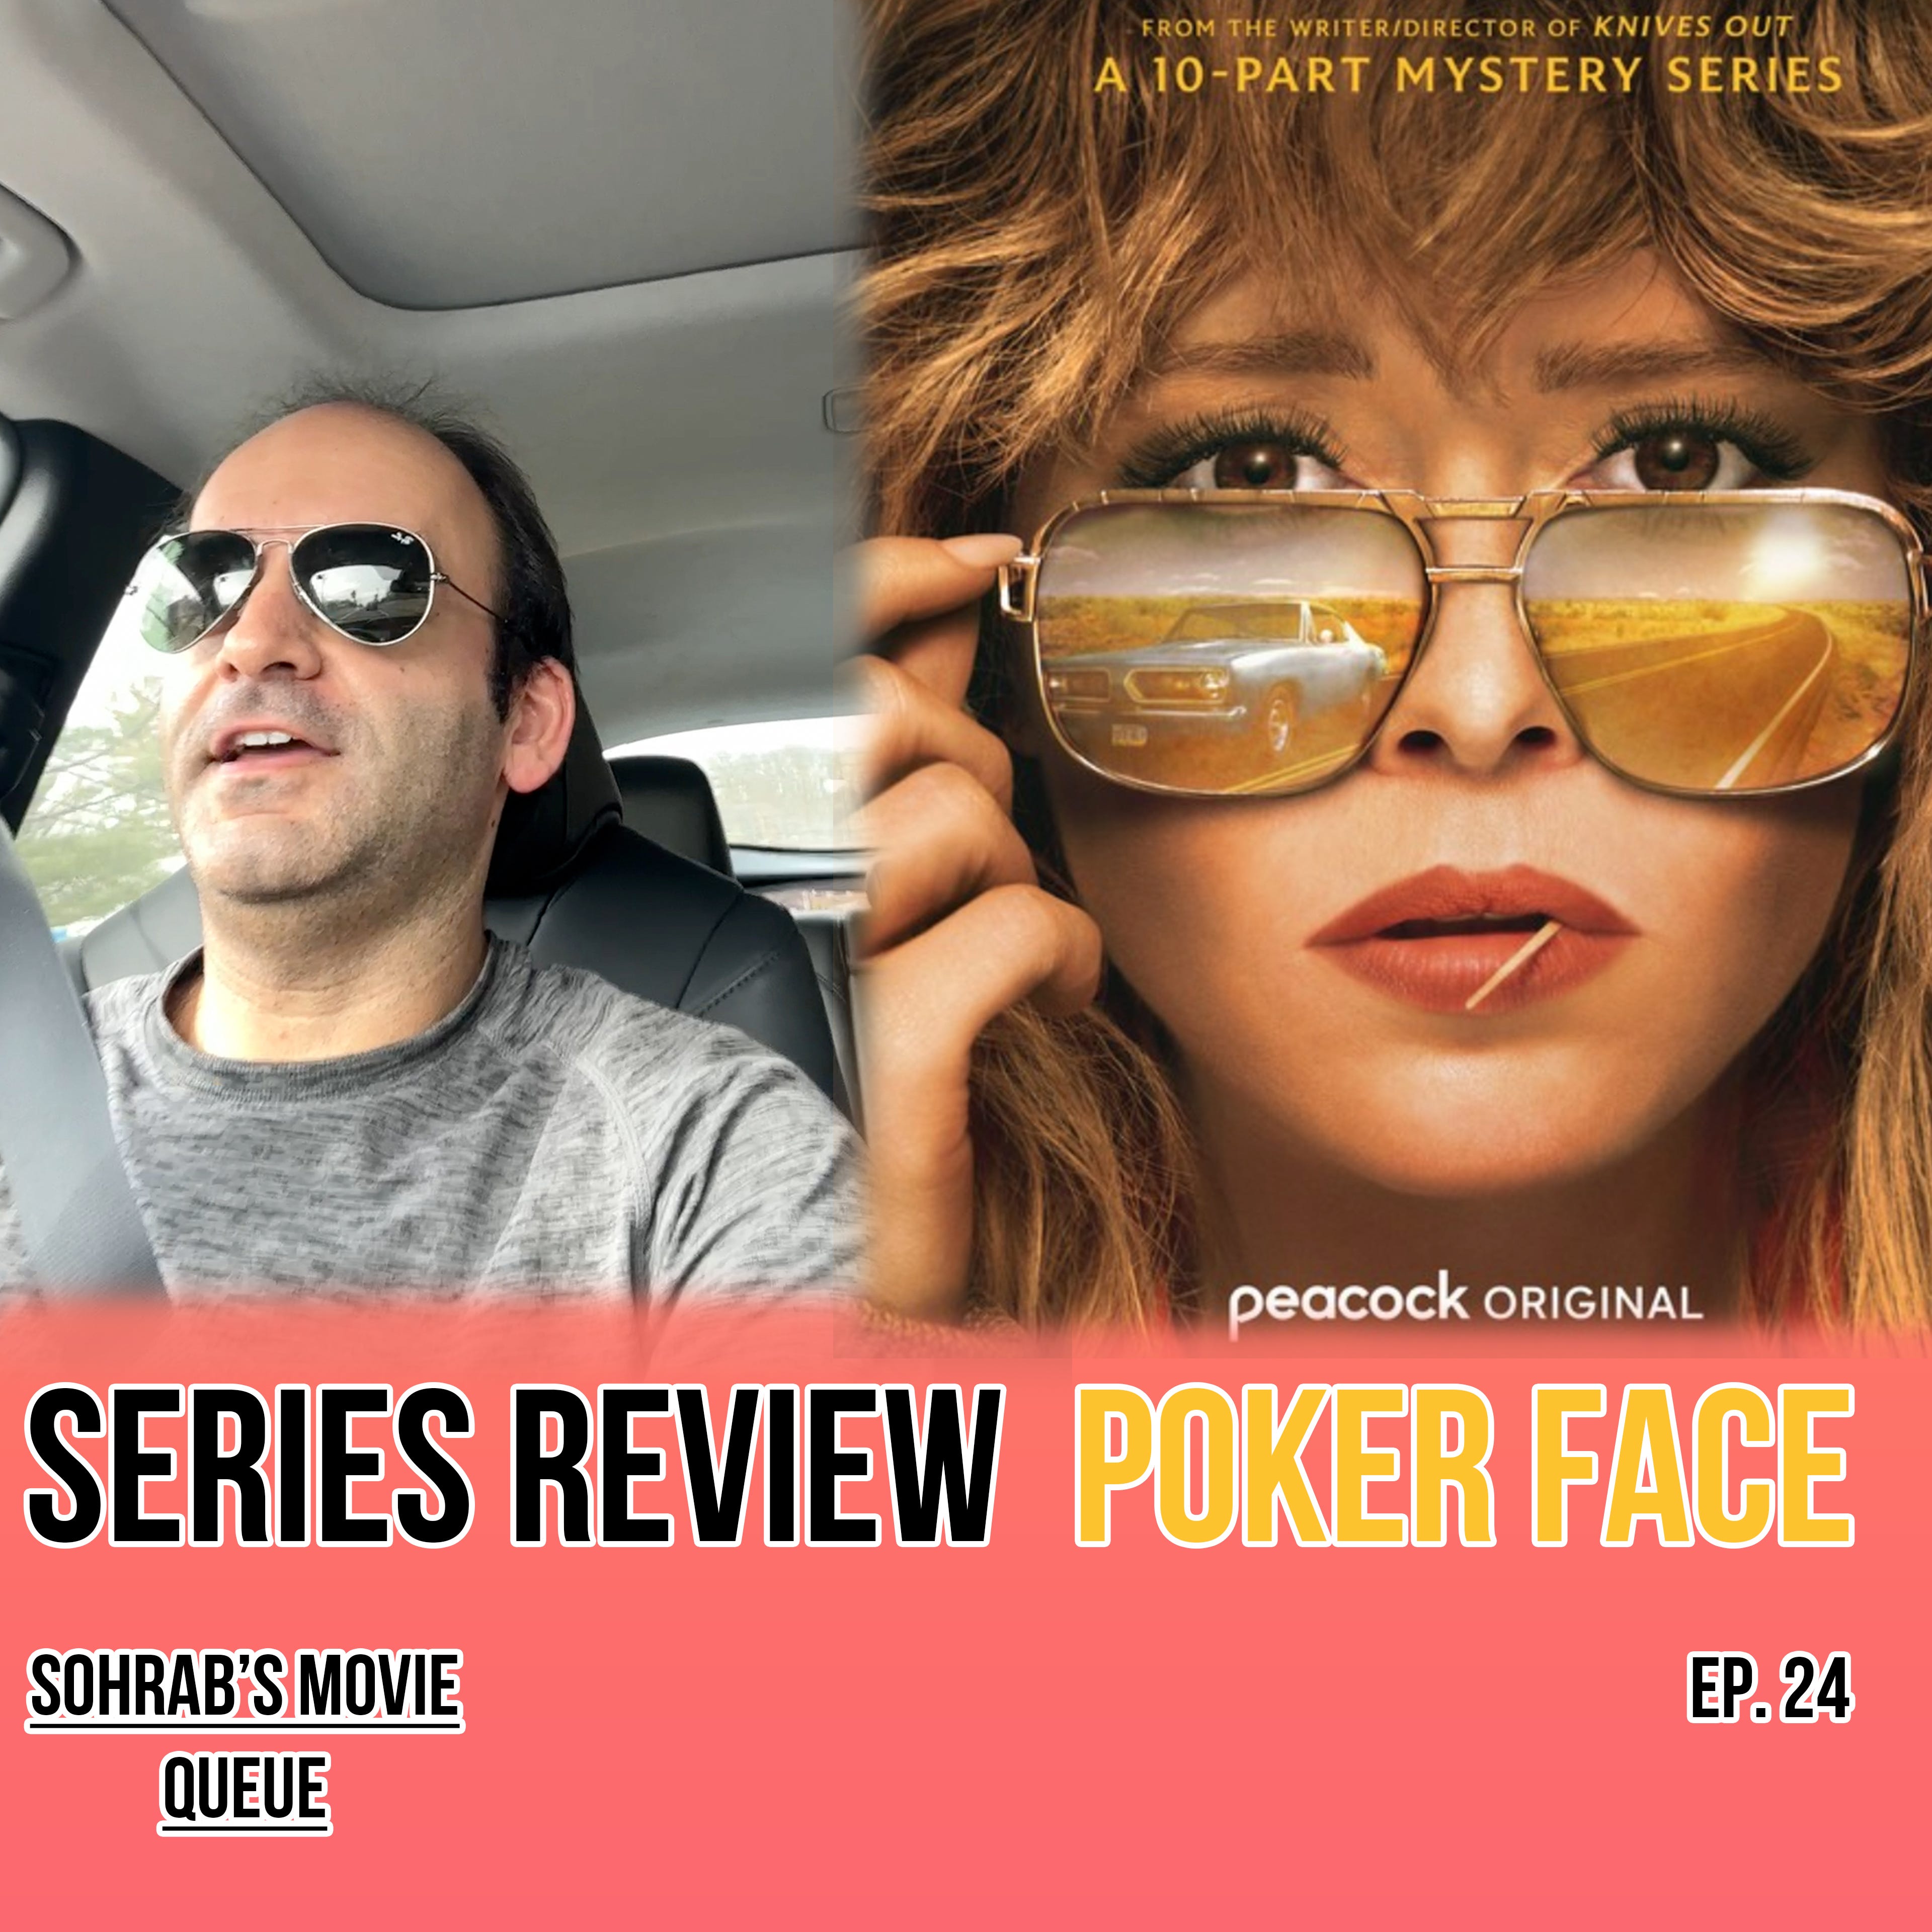 Poker Face' Review: Rian Johnson Peacock Series Is a One-Hit